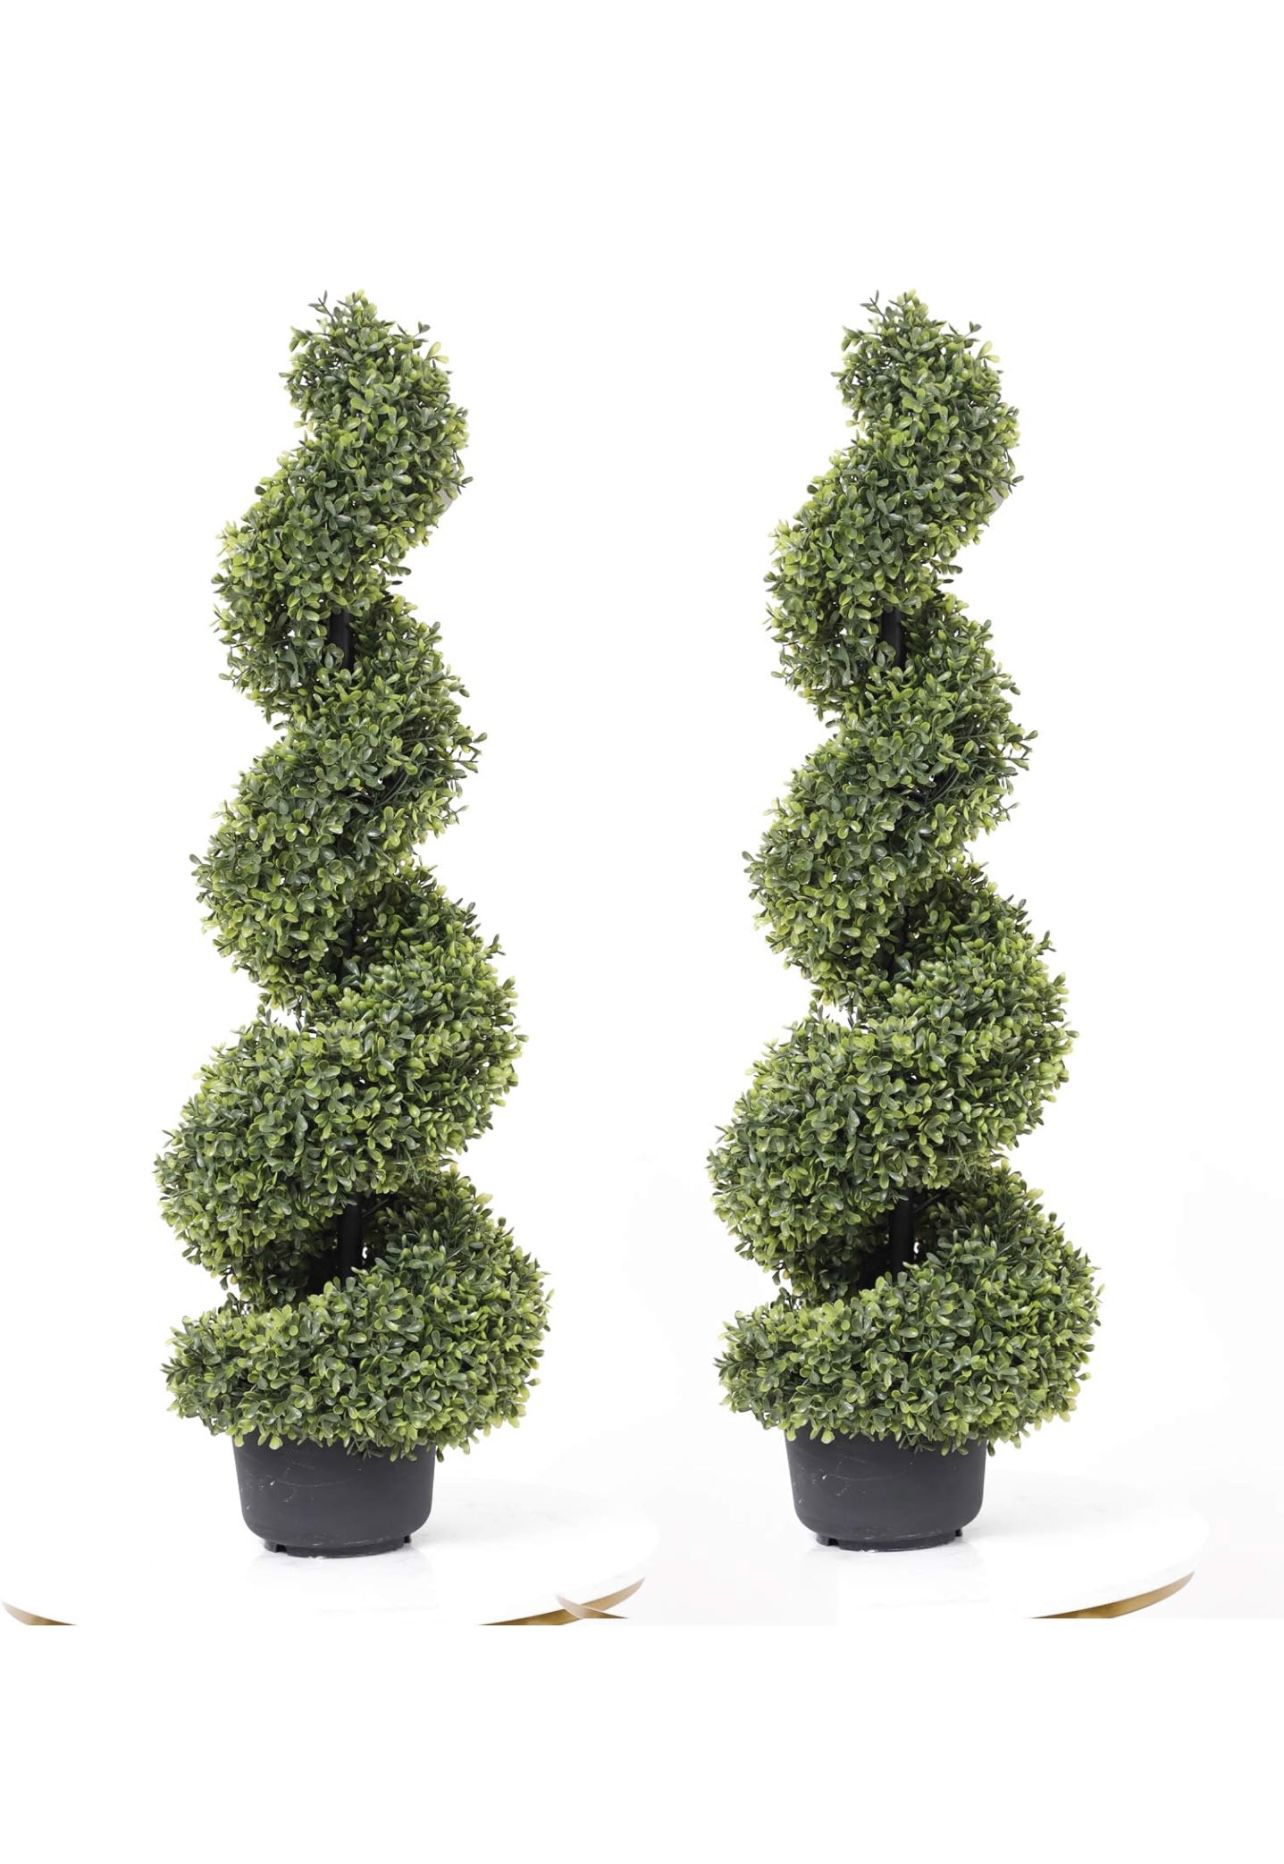 Set of 2 35 Inch Artificial Boxwood Topiary Tree Spiral Plants Fake Faux Plant Decor in Plastic Pot Green Indoor or Outdoor,